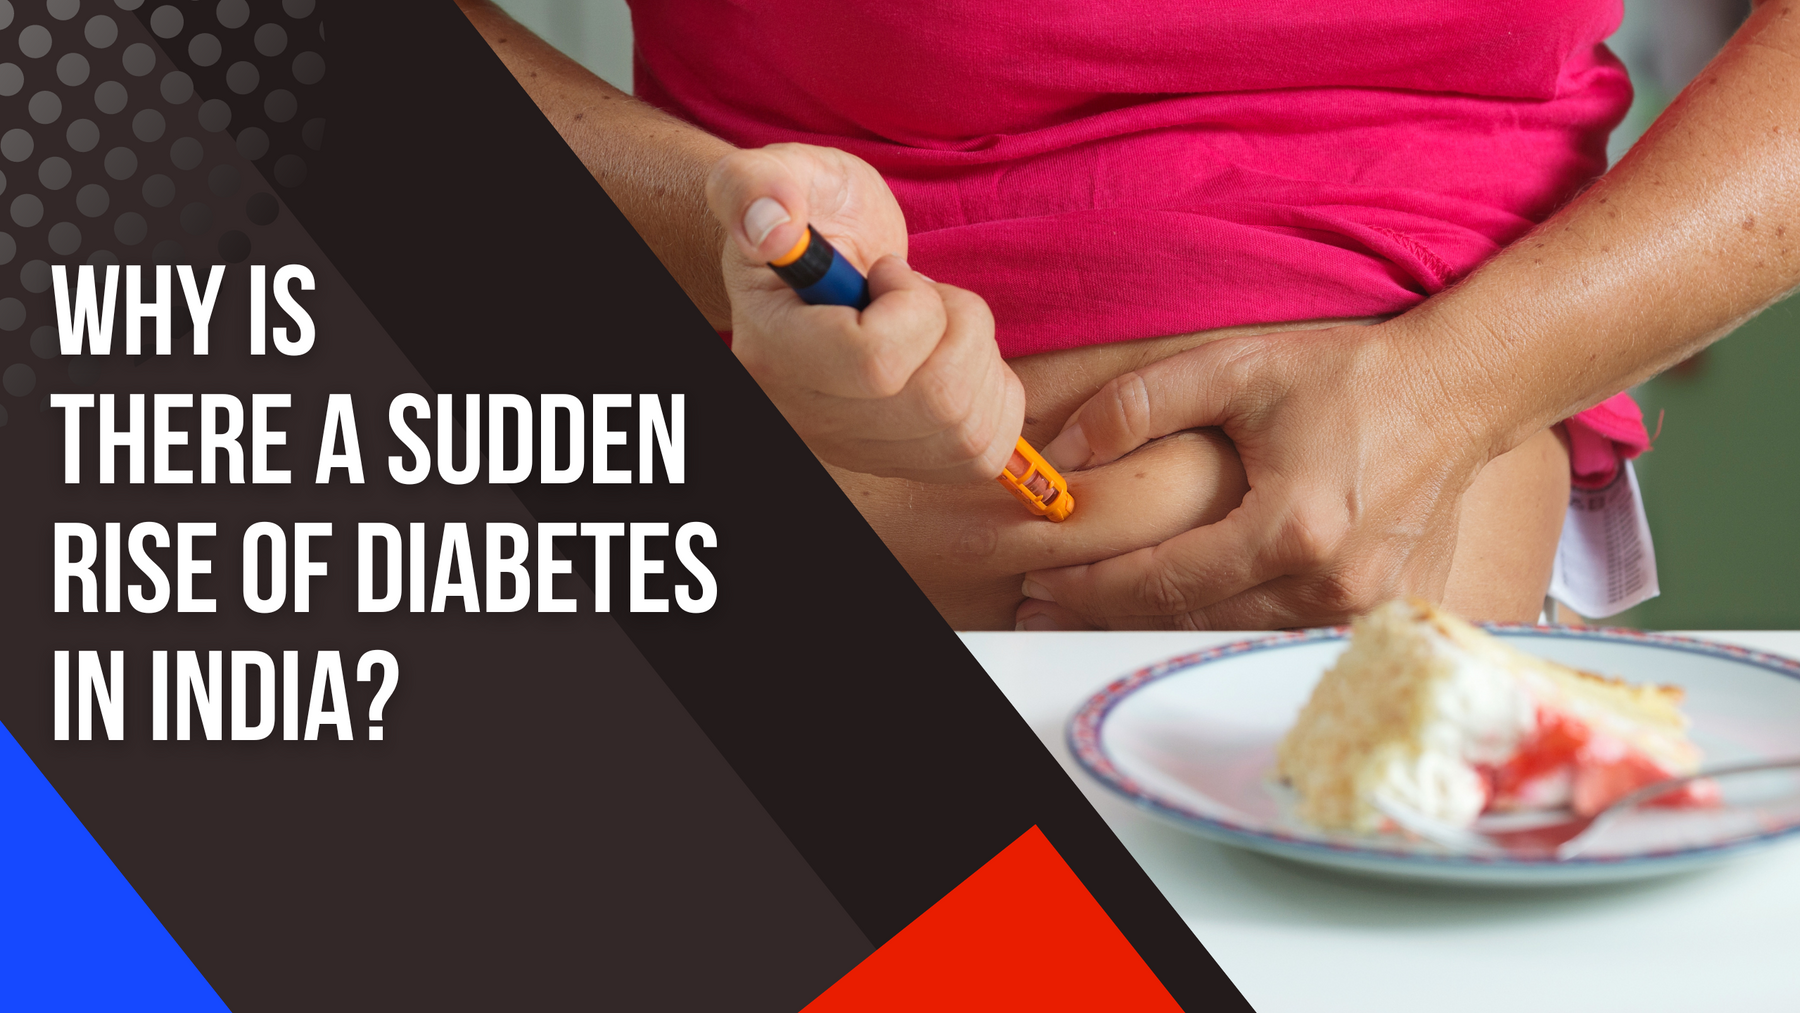 Why is there a sudden rise in Diabetes in India?